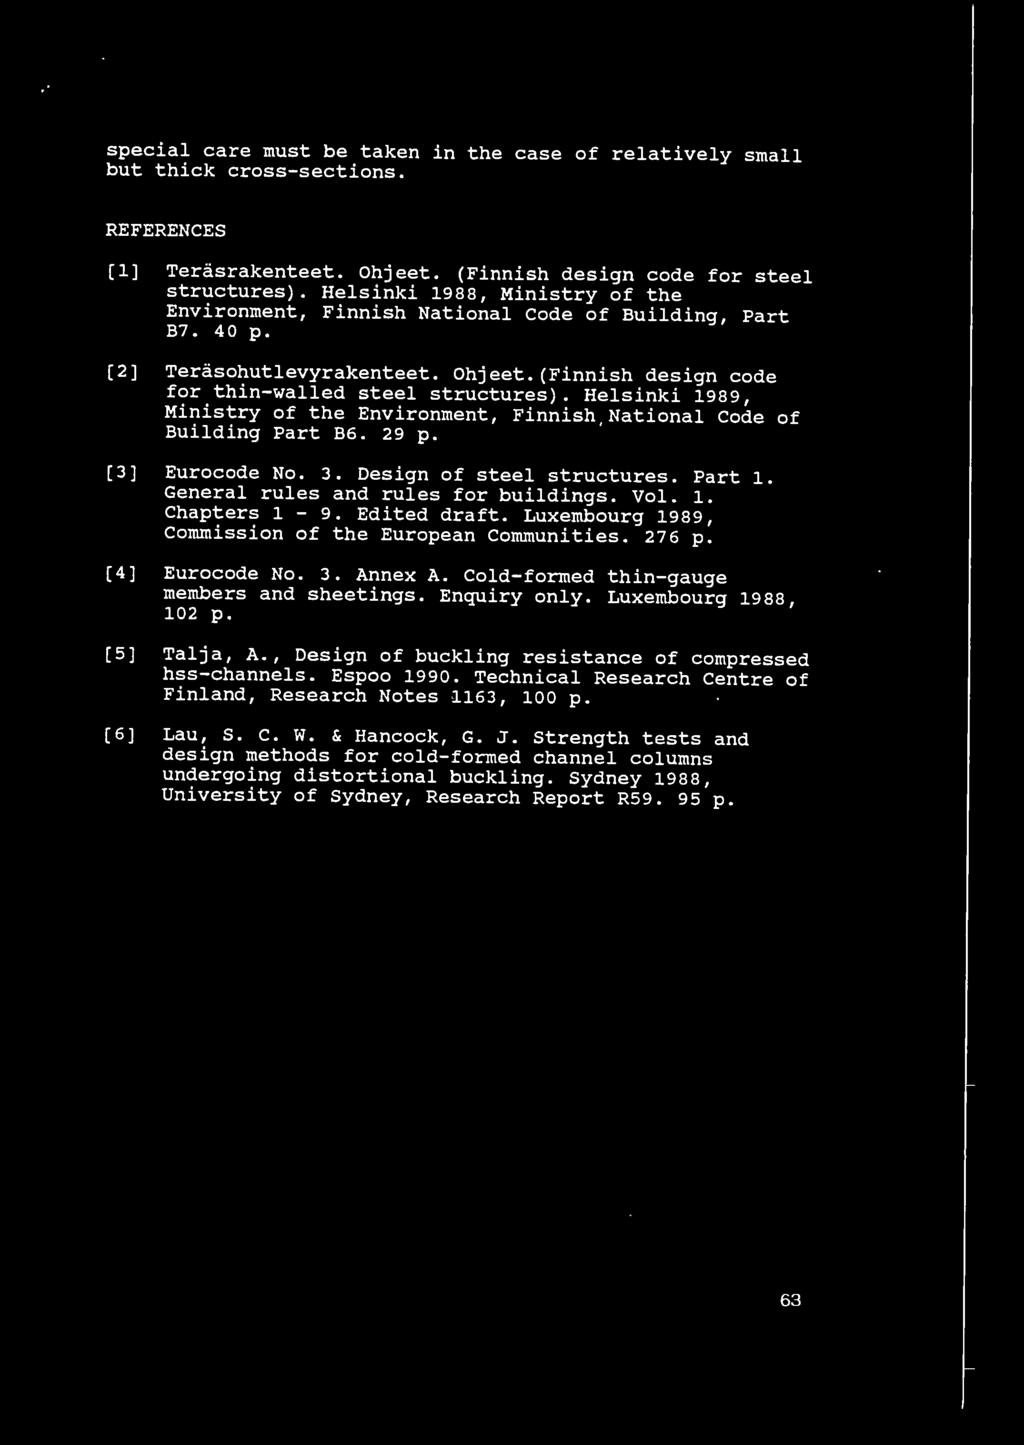 Helsinki 1989, Ministry of the Environment, Finnish,National Code of Building Part B6. 29 p. (3] Eurocode No. 3. Design of steel structures. Part 1. General rules and rules for buildings. Vol. 1. Chapters 1-9.